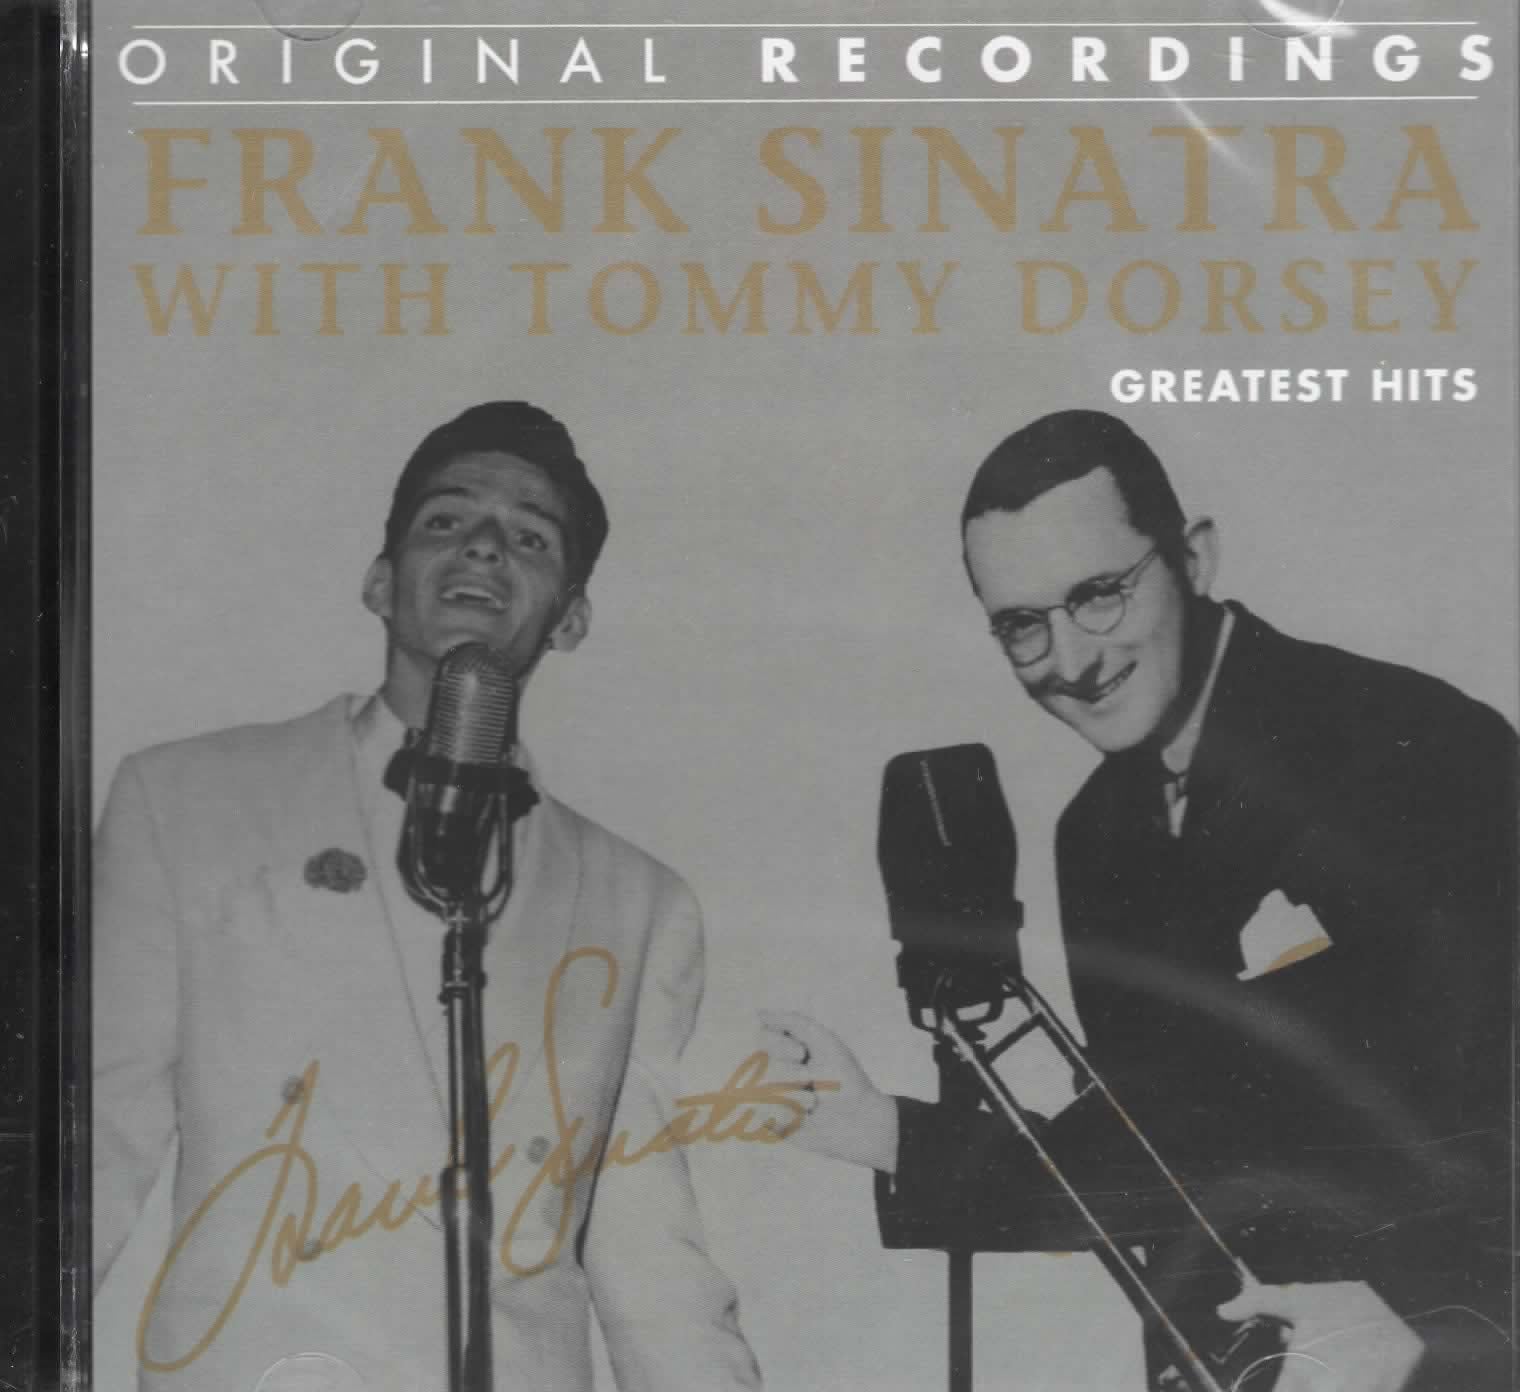 CD Frank Sinatra With Tommy Dorsey - Greatest Hits